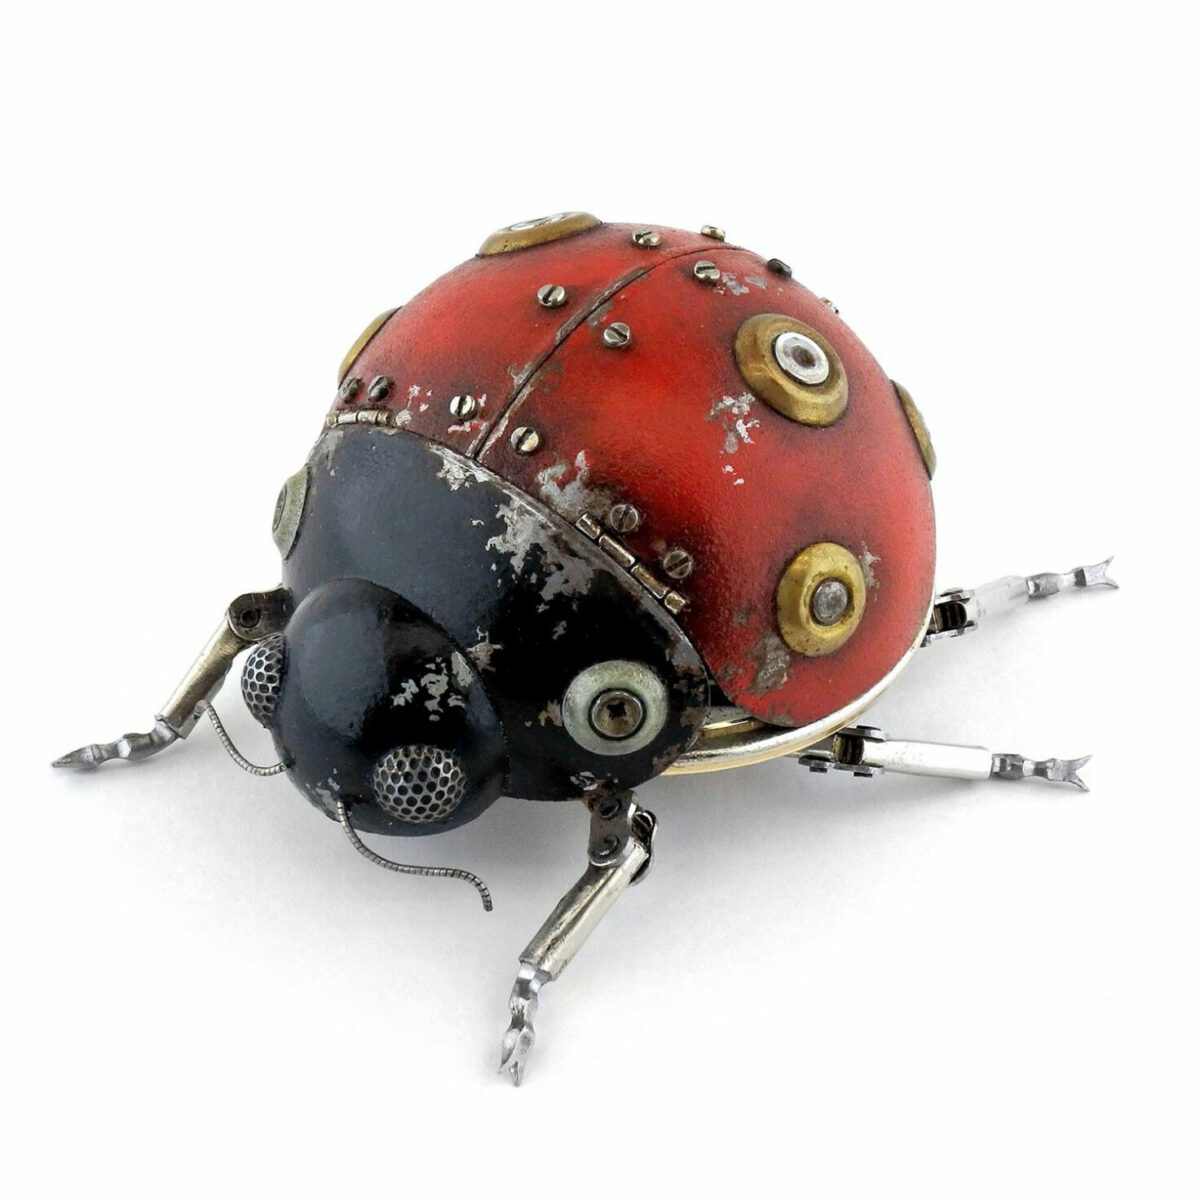 Intricate Steampunk Creatures By Igor Verny (7)